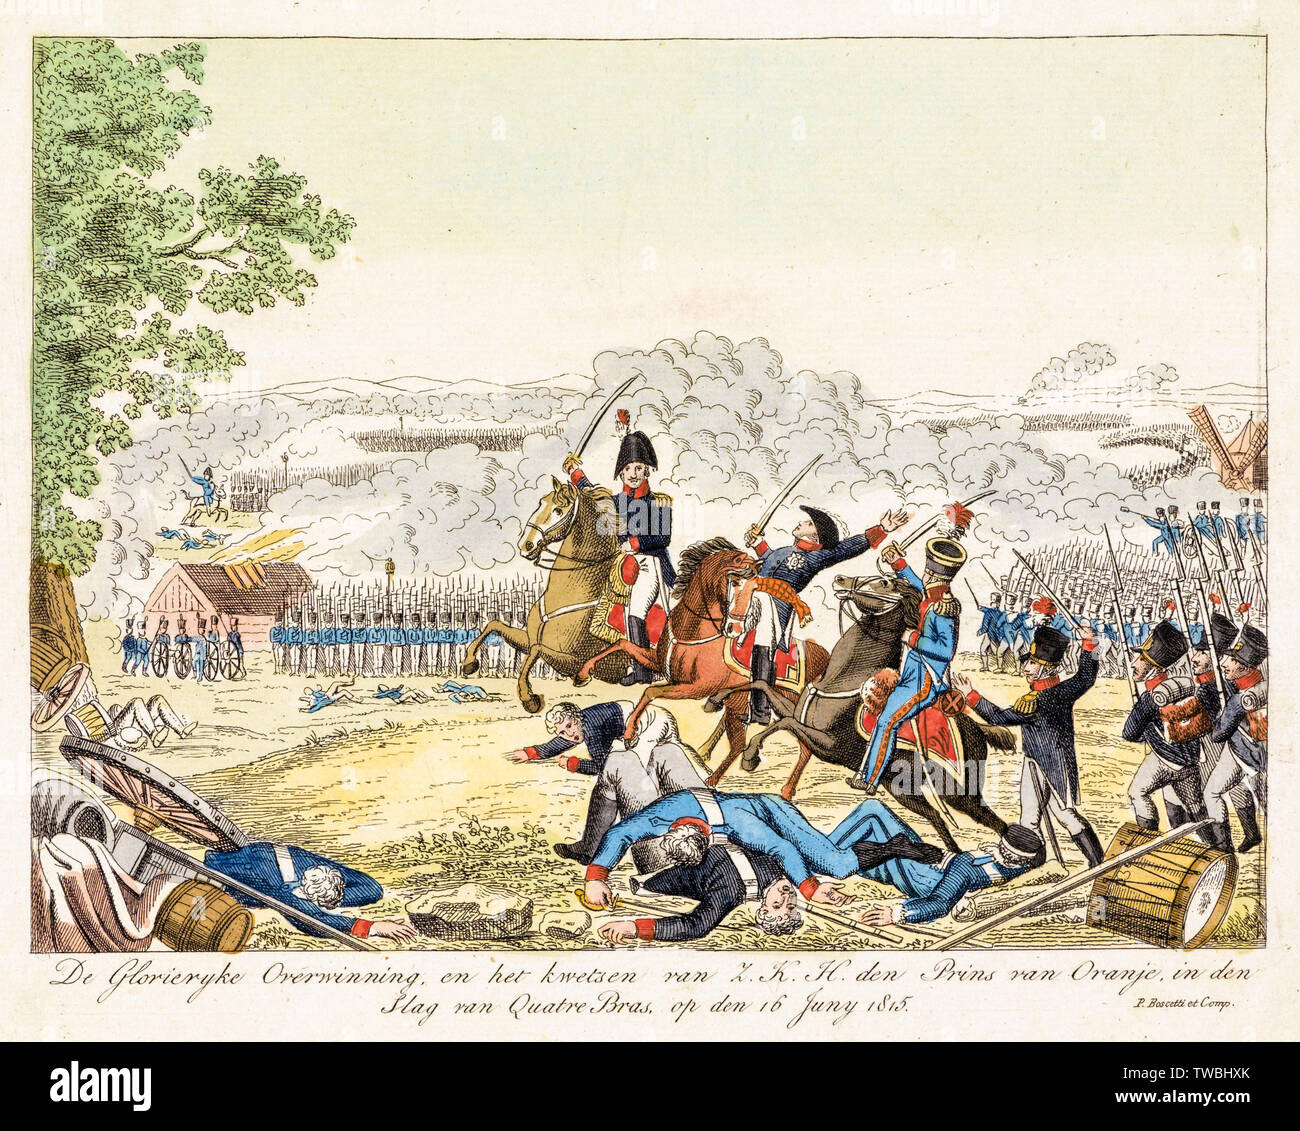 William II of the Netherlands wounded at the Battle of Waterloo, print, 1815-1850 Stock Photo